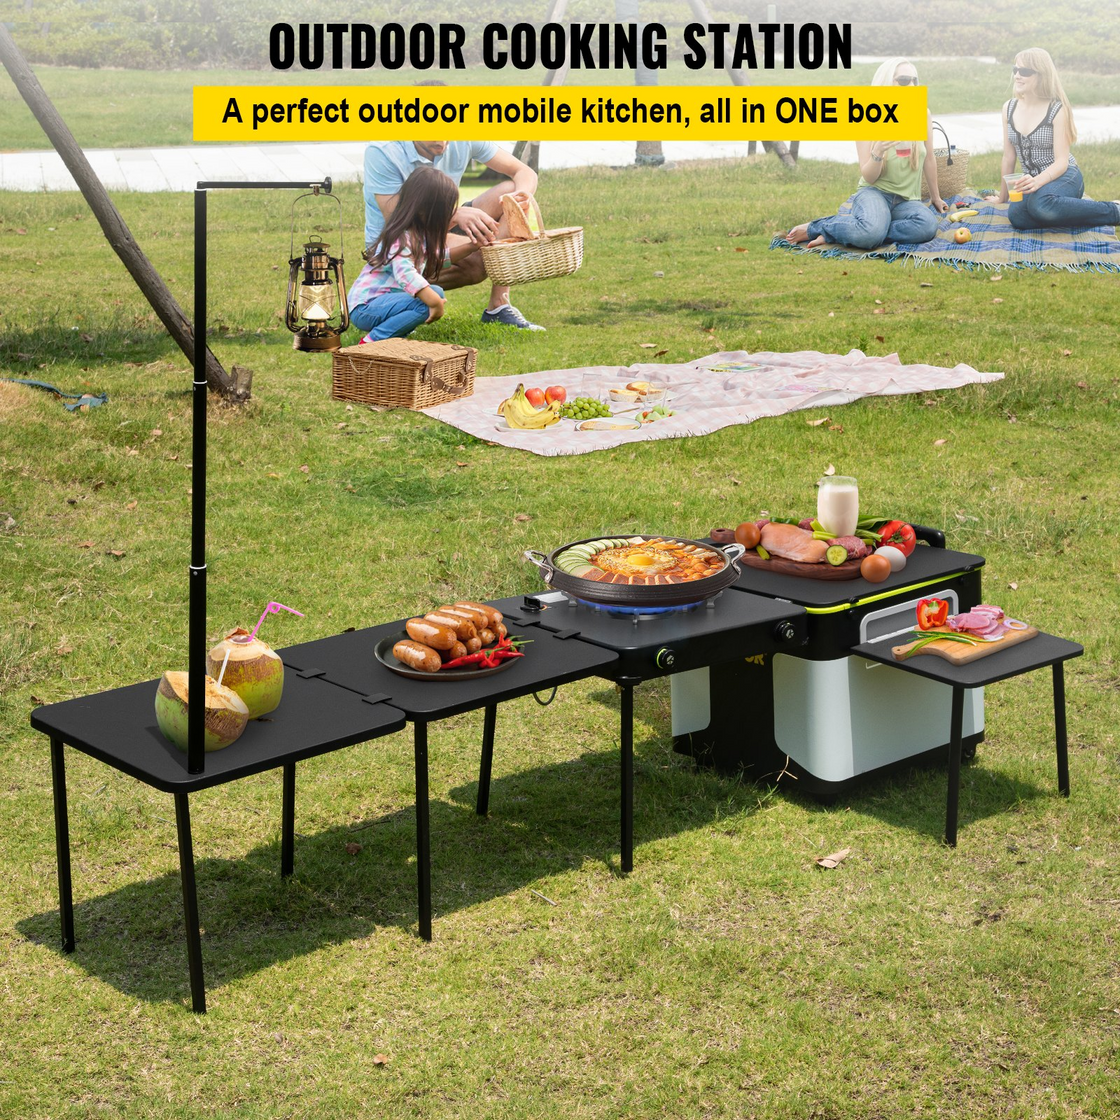 VEVOR Outdoor Mobile Kitchen, Portable Multifunctional Camp Box with Wheels All in One Integrated Cooking Station with Windproof Stove, Folding Tables Storage Organizer, Black